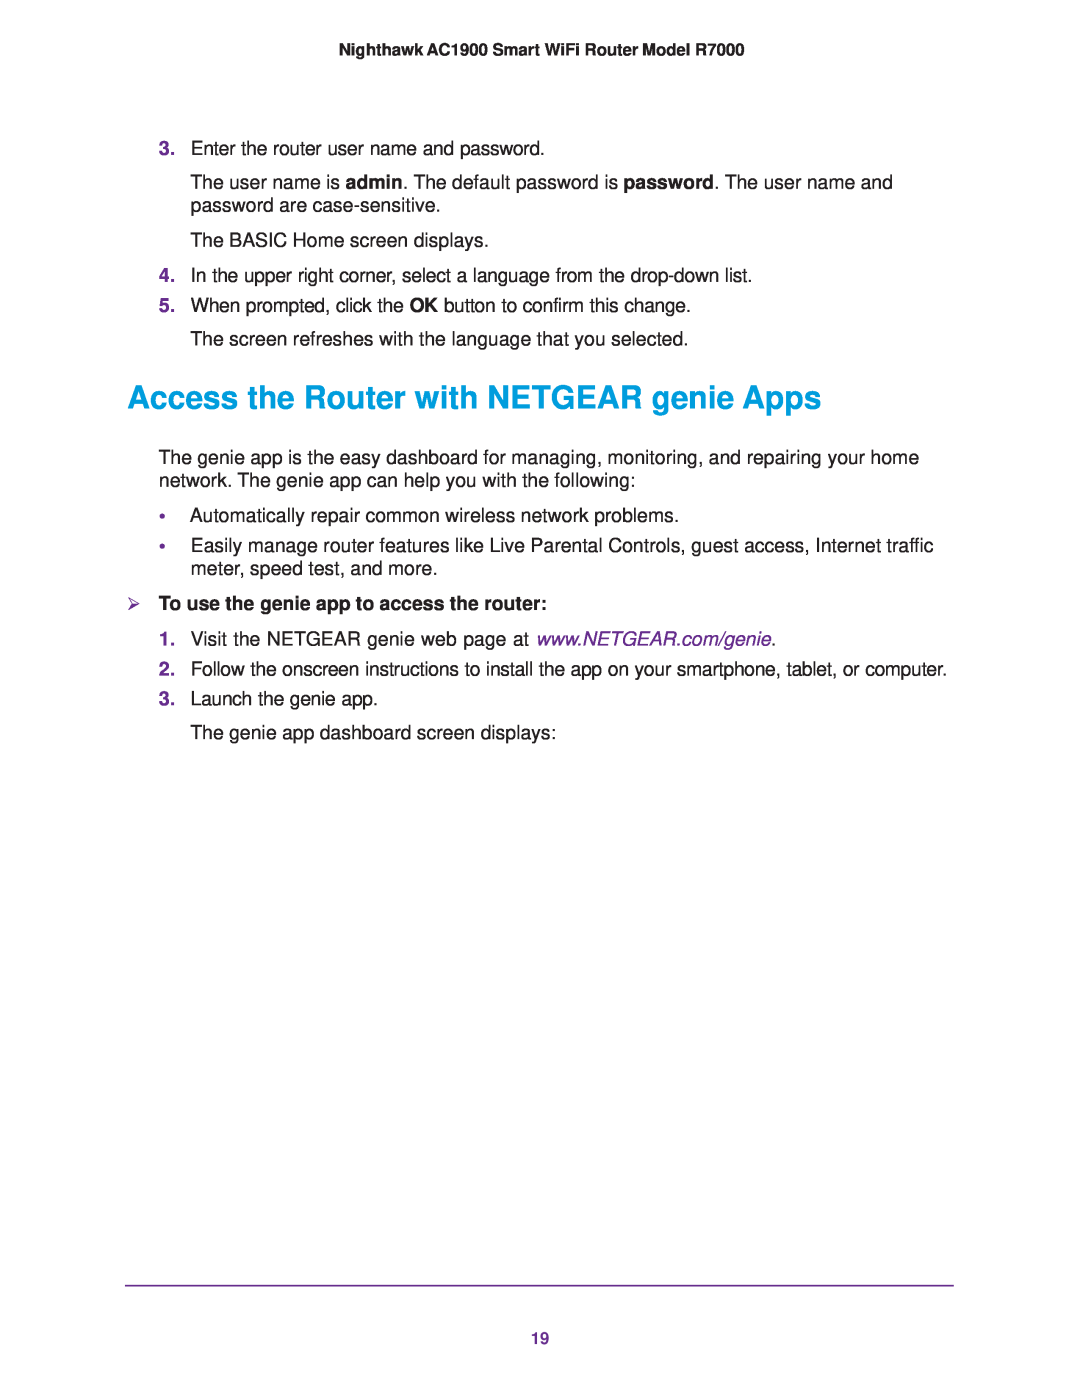 NETGEAR R7000 user manual Access the Router with NETGEAR genie Apps,  To use the genie app to access the router 